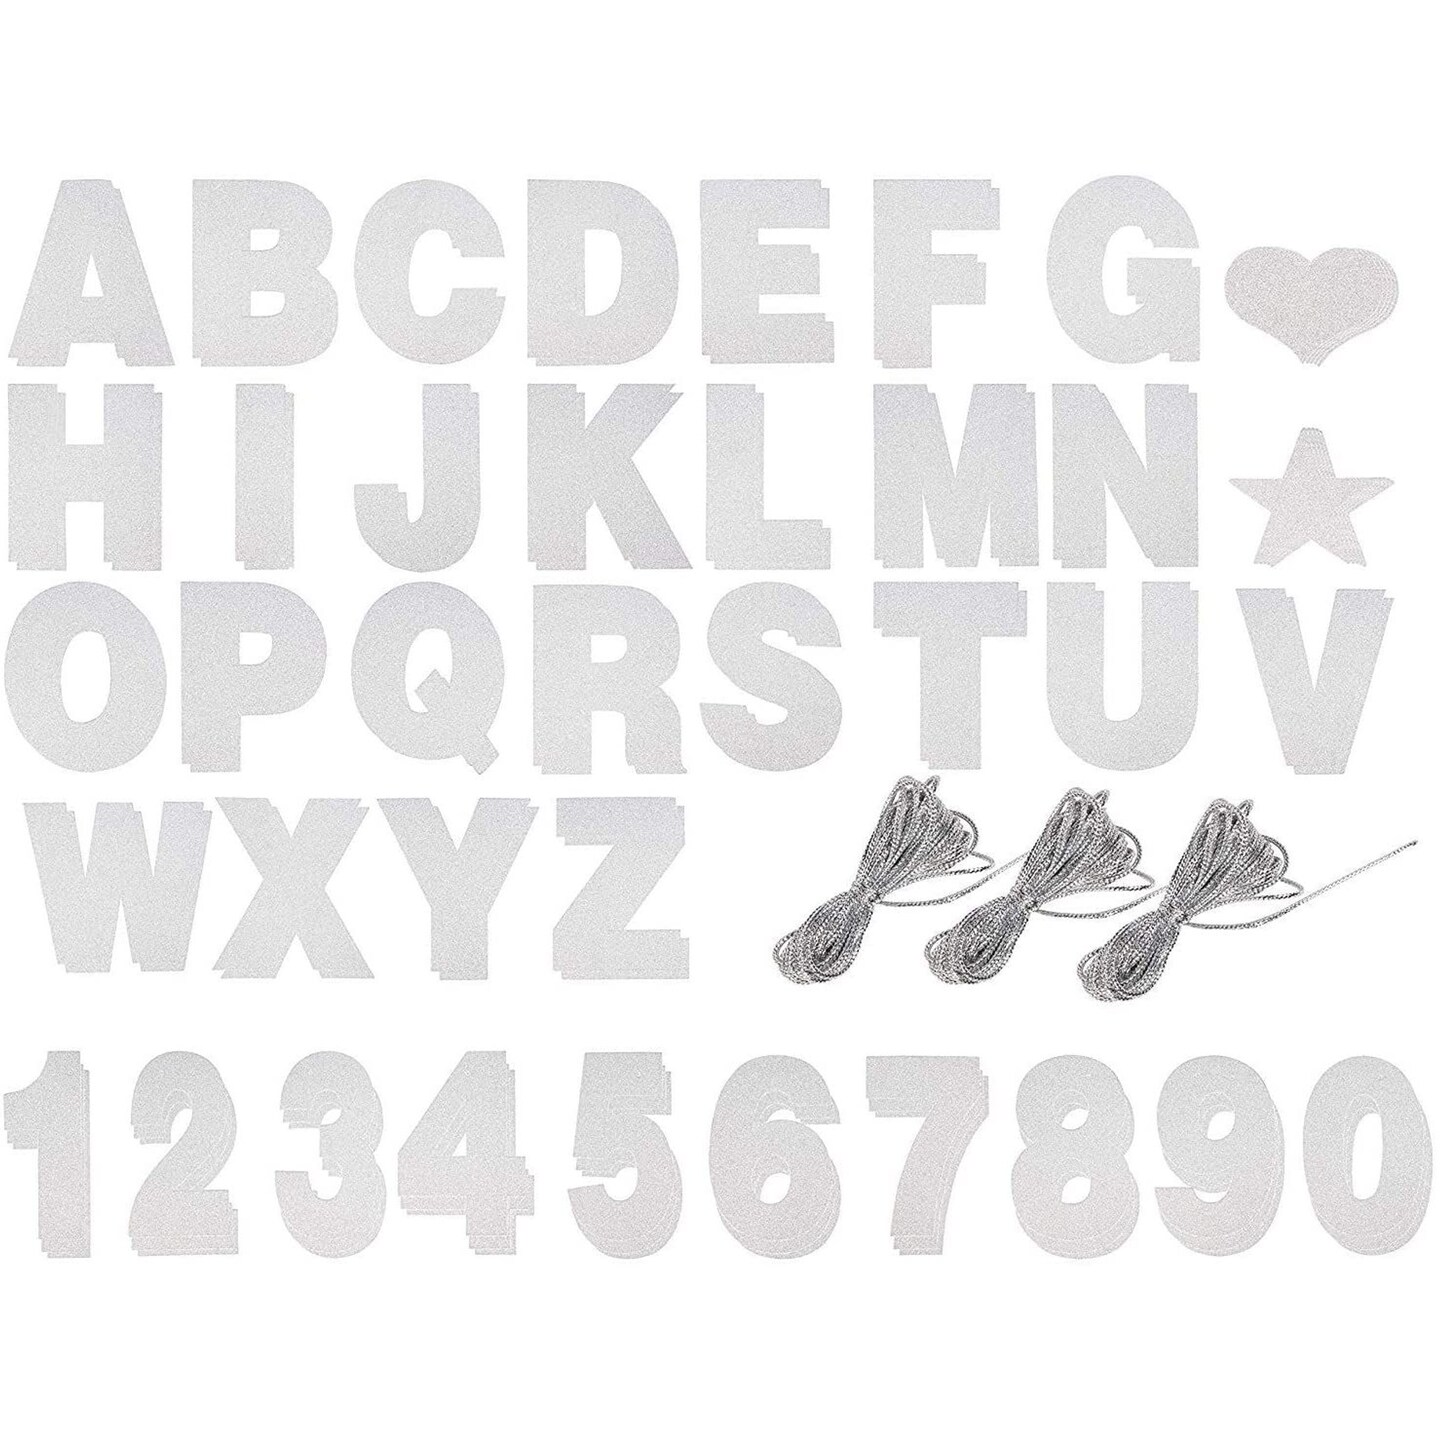 126 Pieces Make Your Own Banner Kit - DIY Banner with Silver Glitter Letters A-Z, Numbers 0-9, Hearts, Stars, and 3 Strings